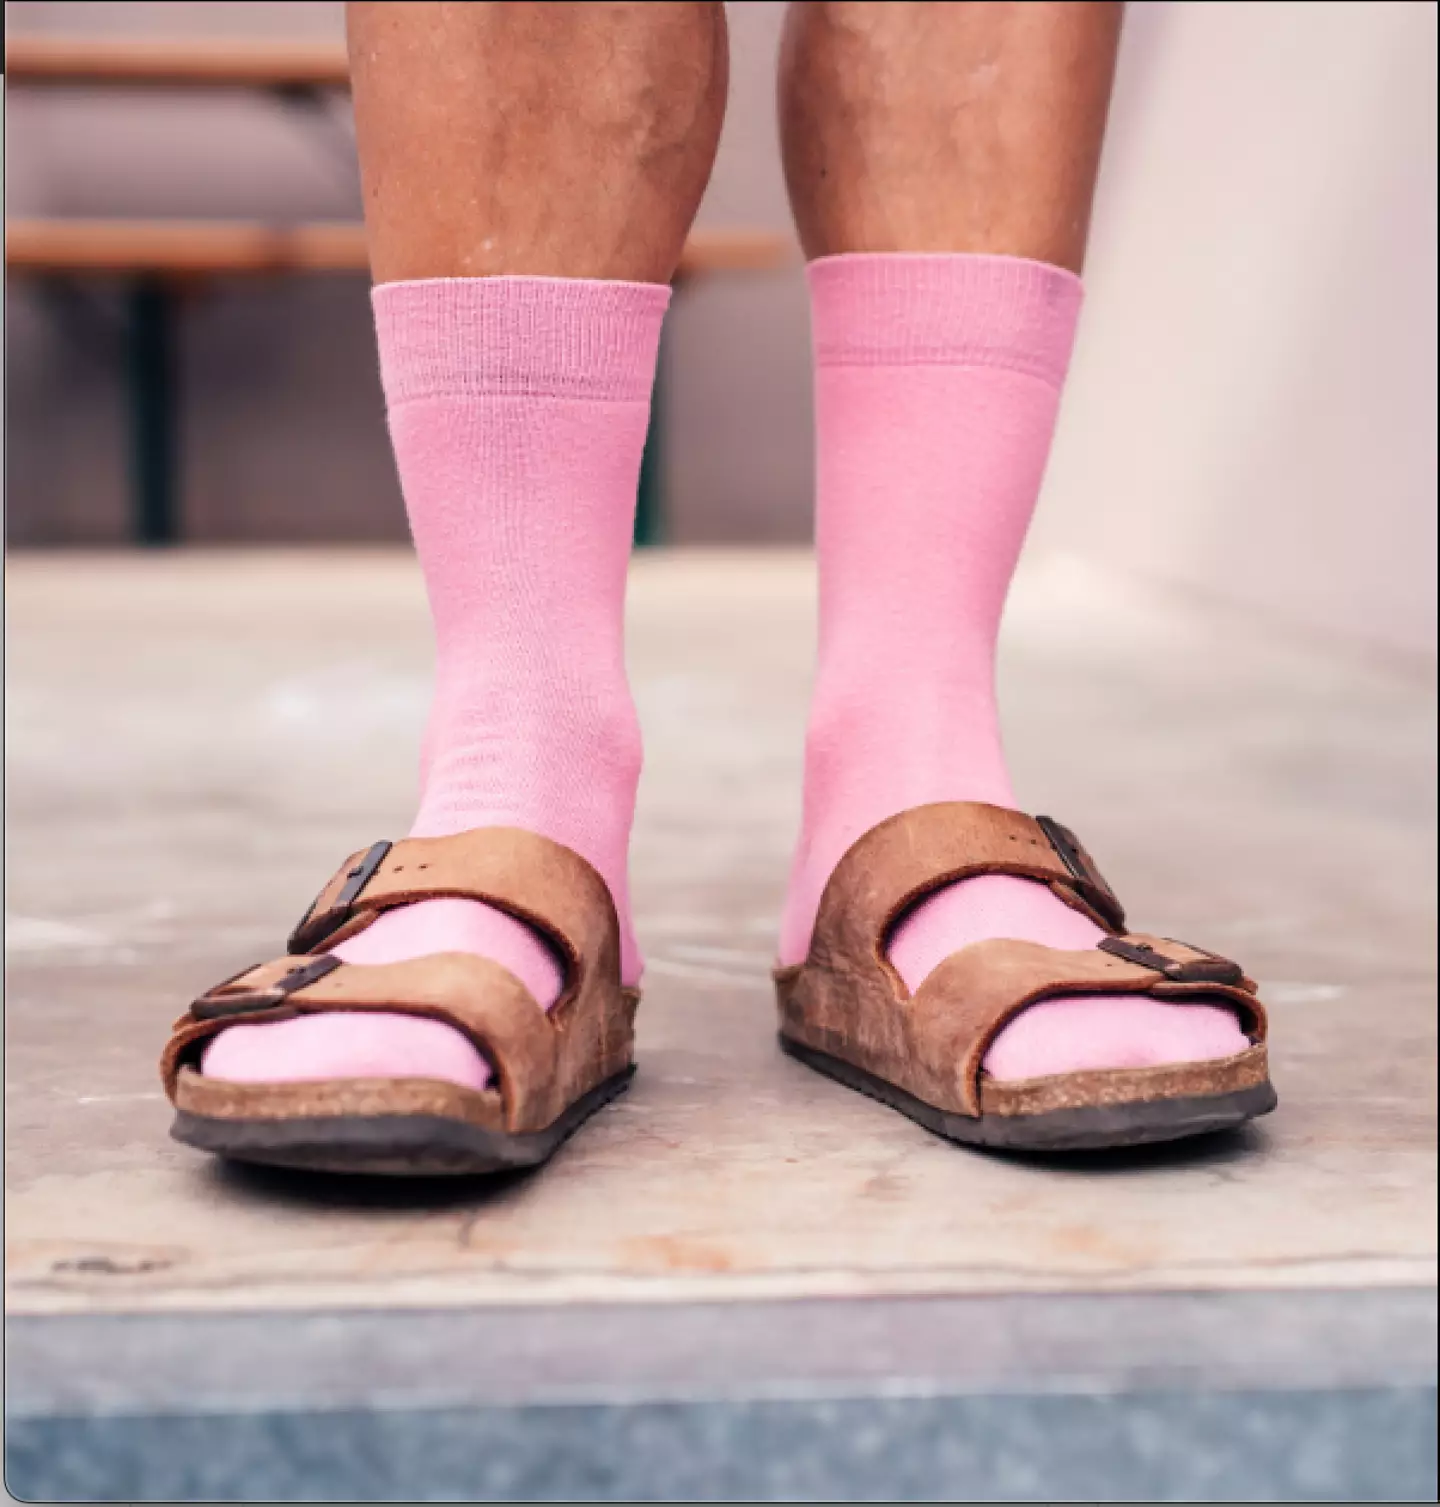 Ankle socks. Getty Images.